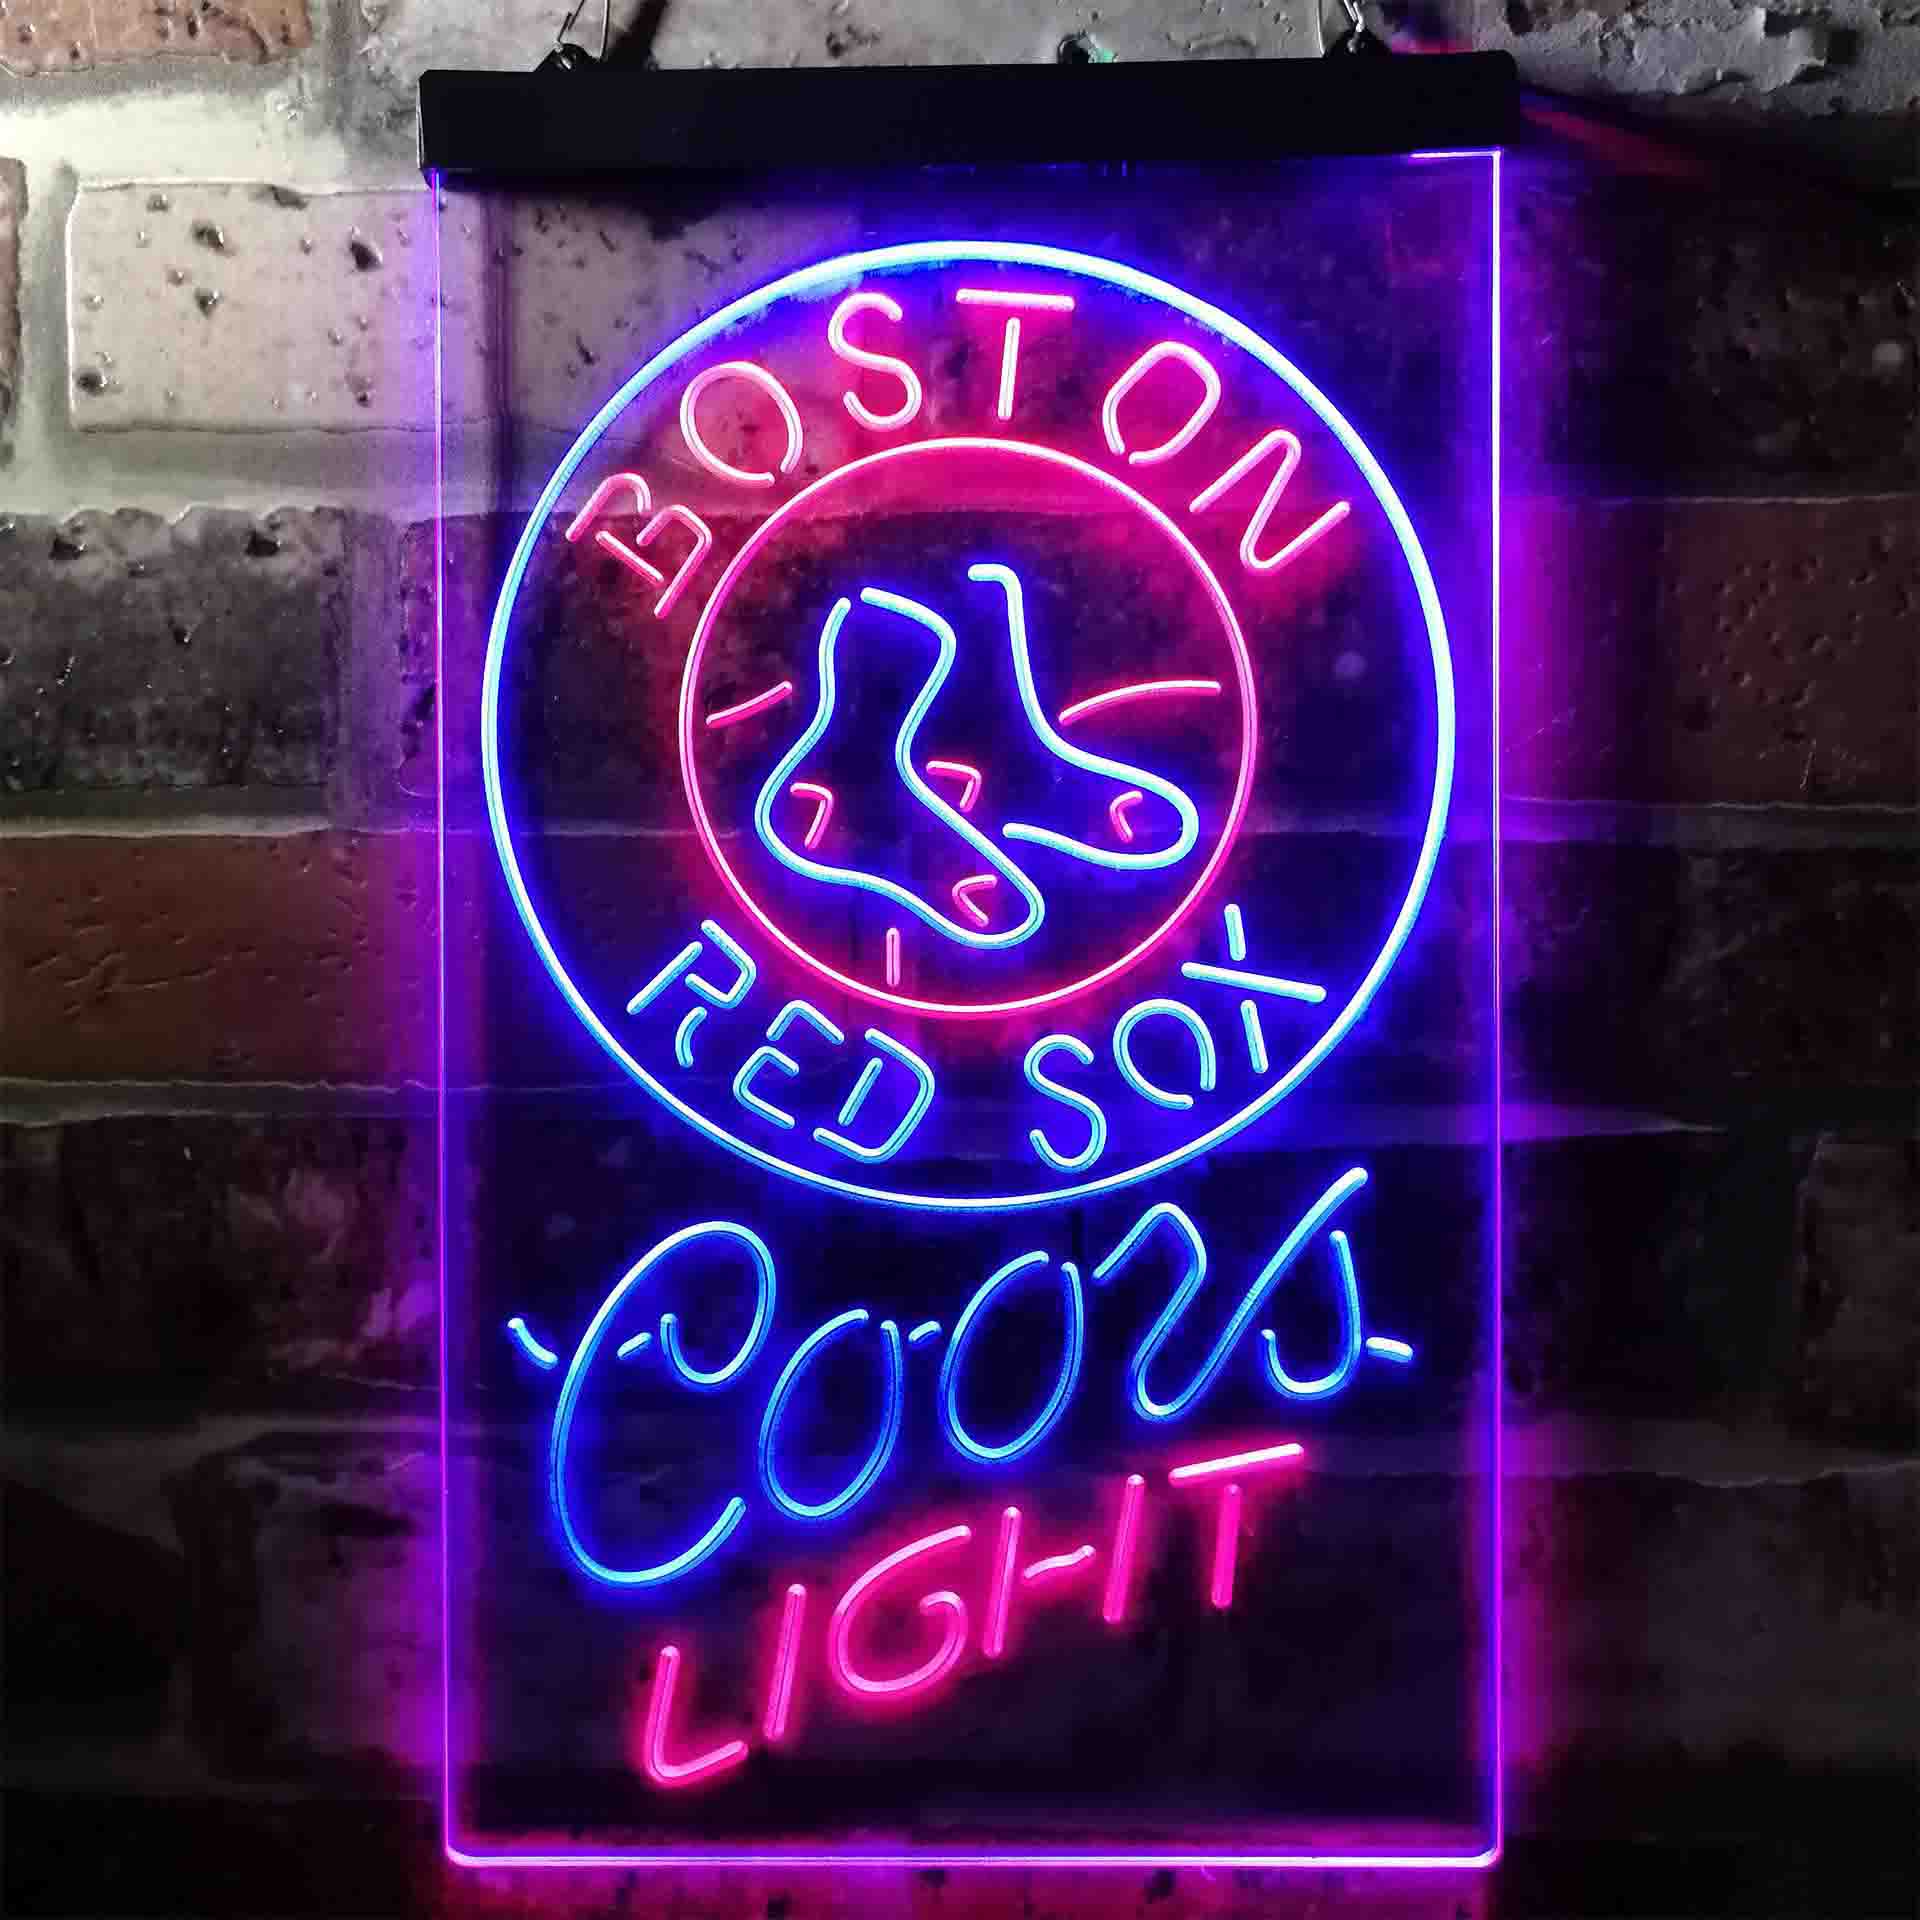 Boston Red Sox Coors Light LED Neon Sign